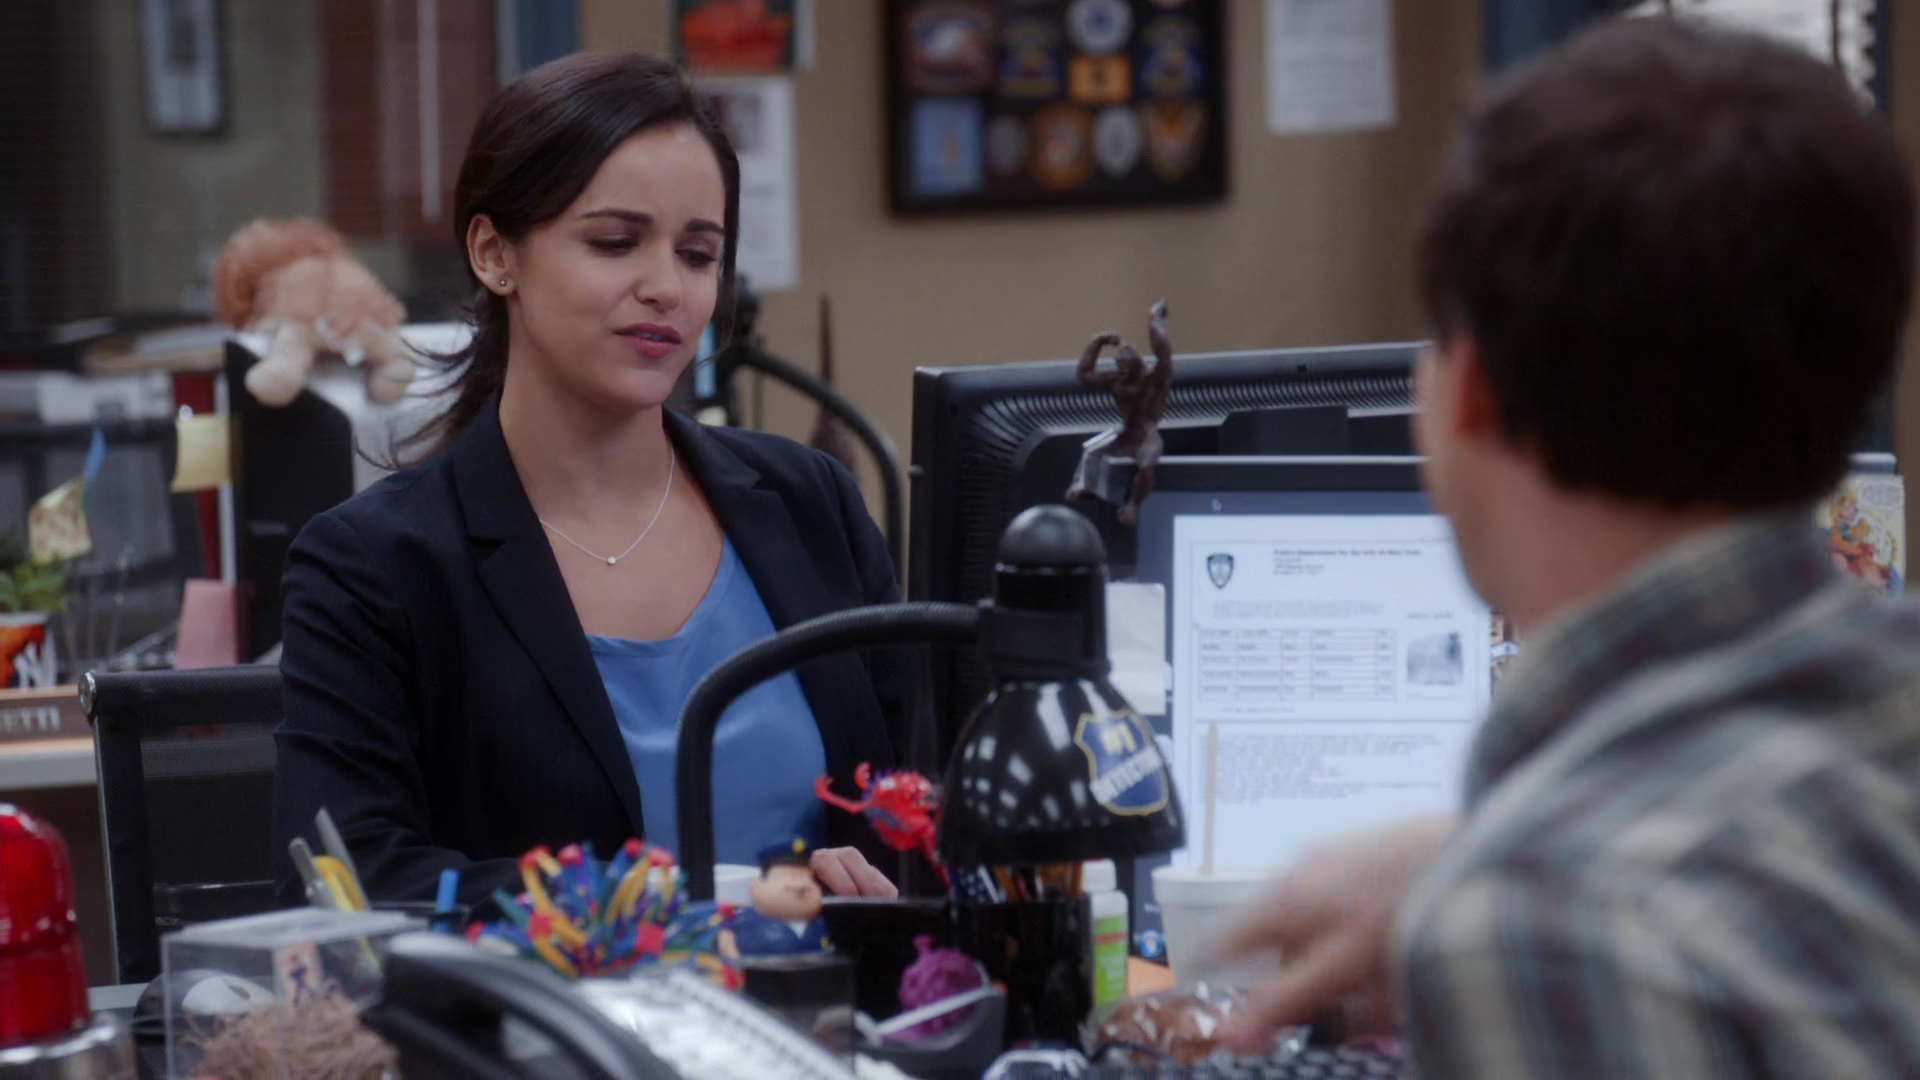 High Quality Brooklyn 99 Amy And Jake At Computers Blank Meme Template